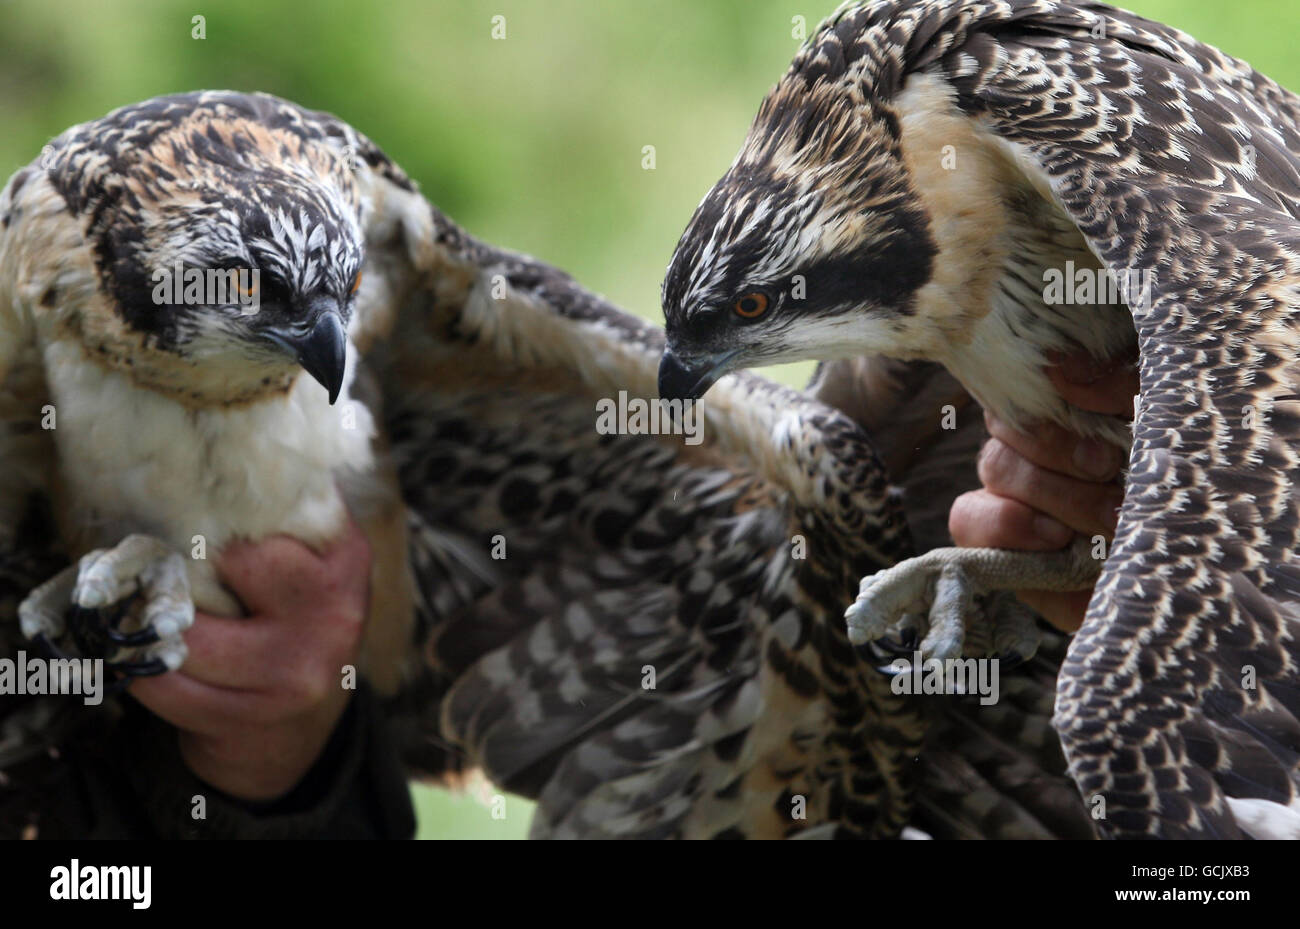 Ronnie Graham helps ring two osprey chicks hatched in the last few months at the Tweed Valley Osprey Centre, near Peebles in Scotland. Stock Photo